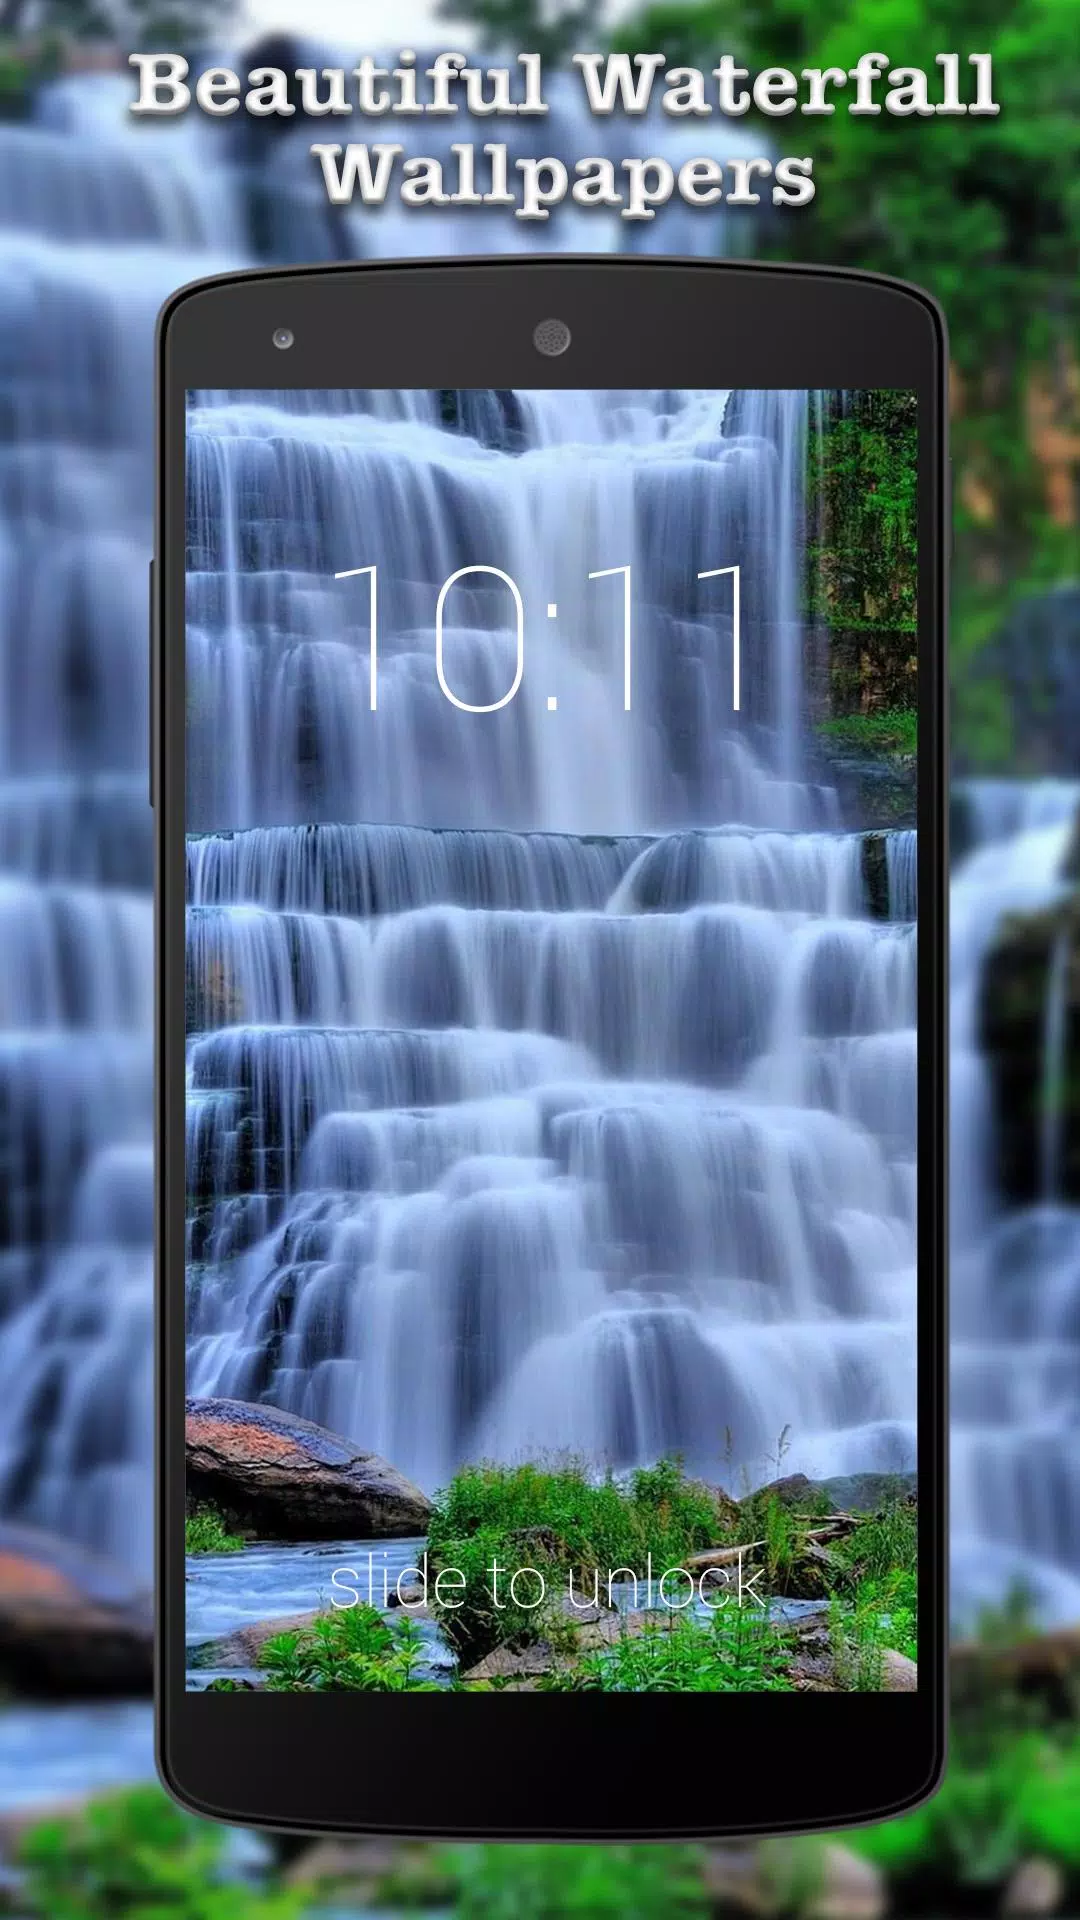 Waterfall wallpaper k hd apk for android download